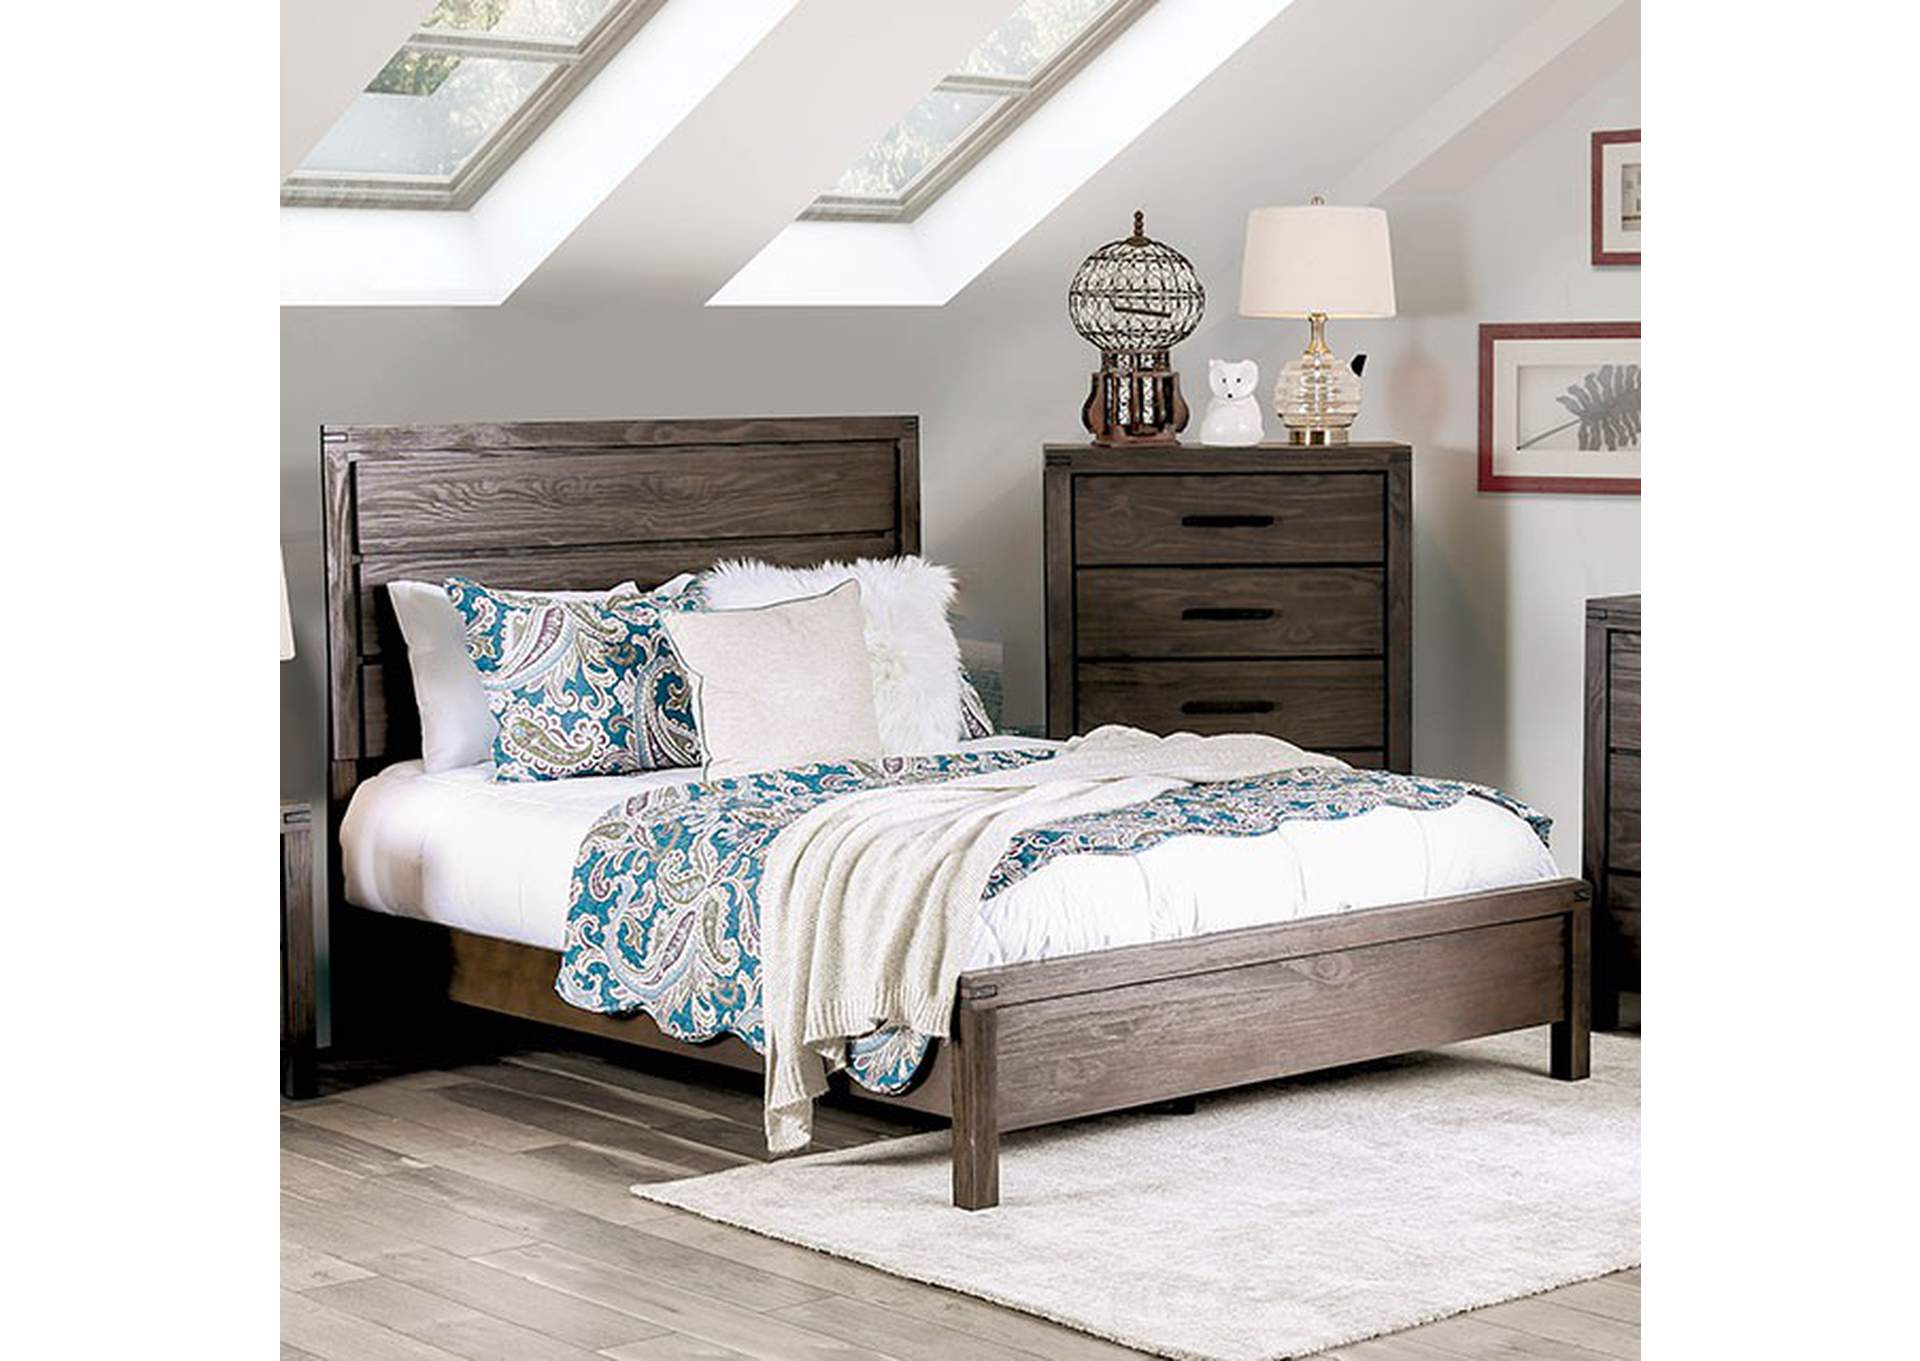 Rexburg Wire-Brushed Rustic Brown Queen Bed,Furniture of America